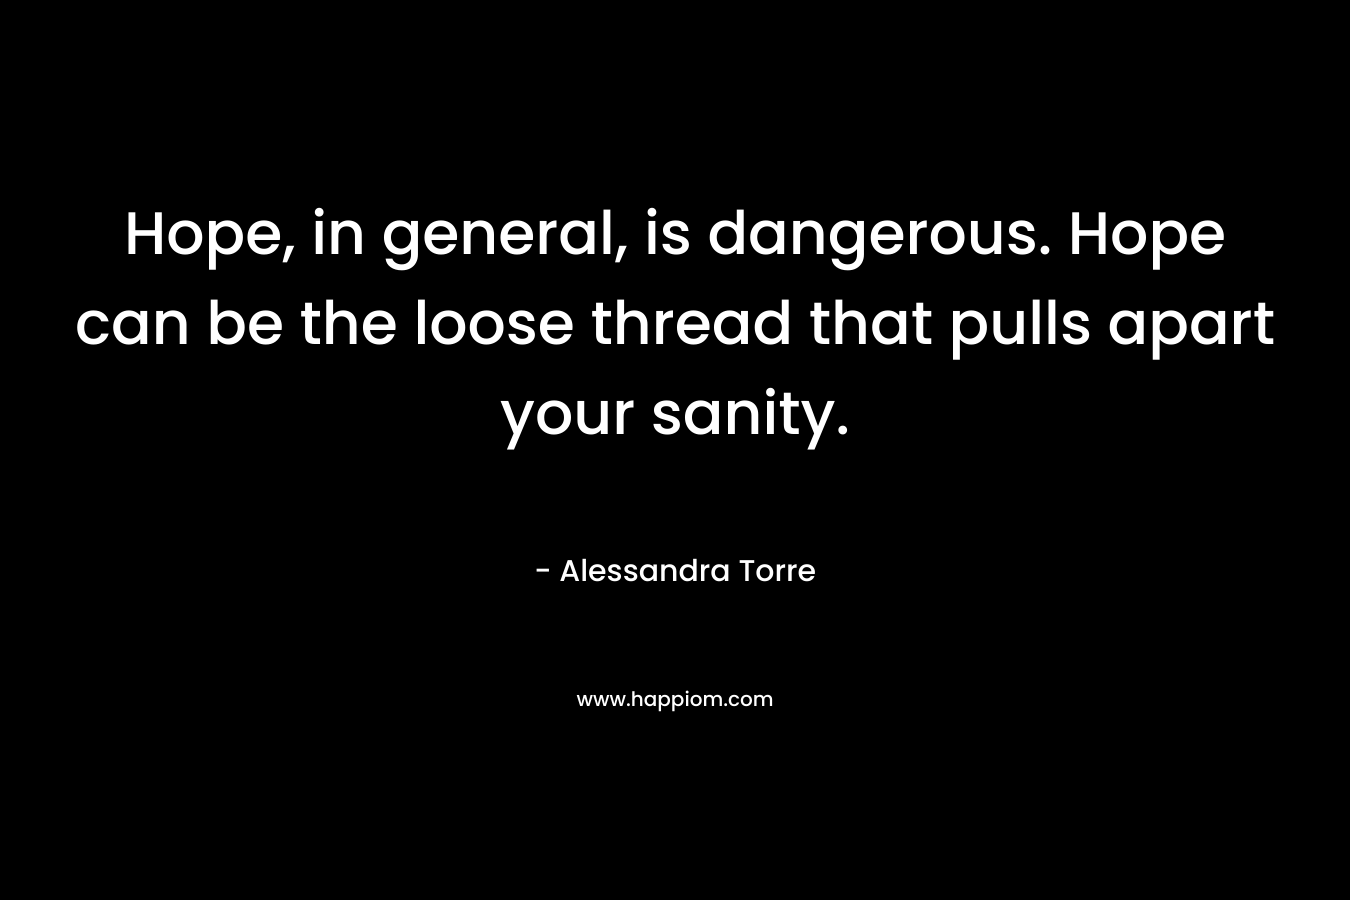 Hope, in general, is dangerous. Hope can be the loose thread that pulls apart your sanity.